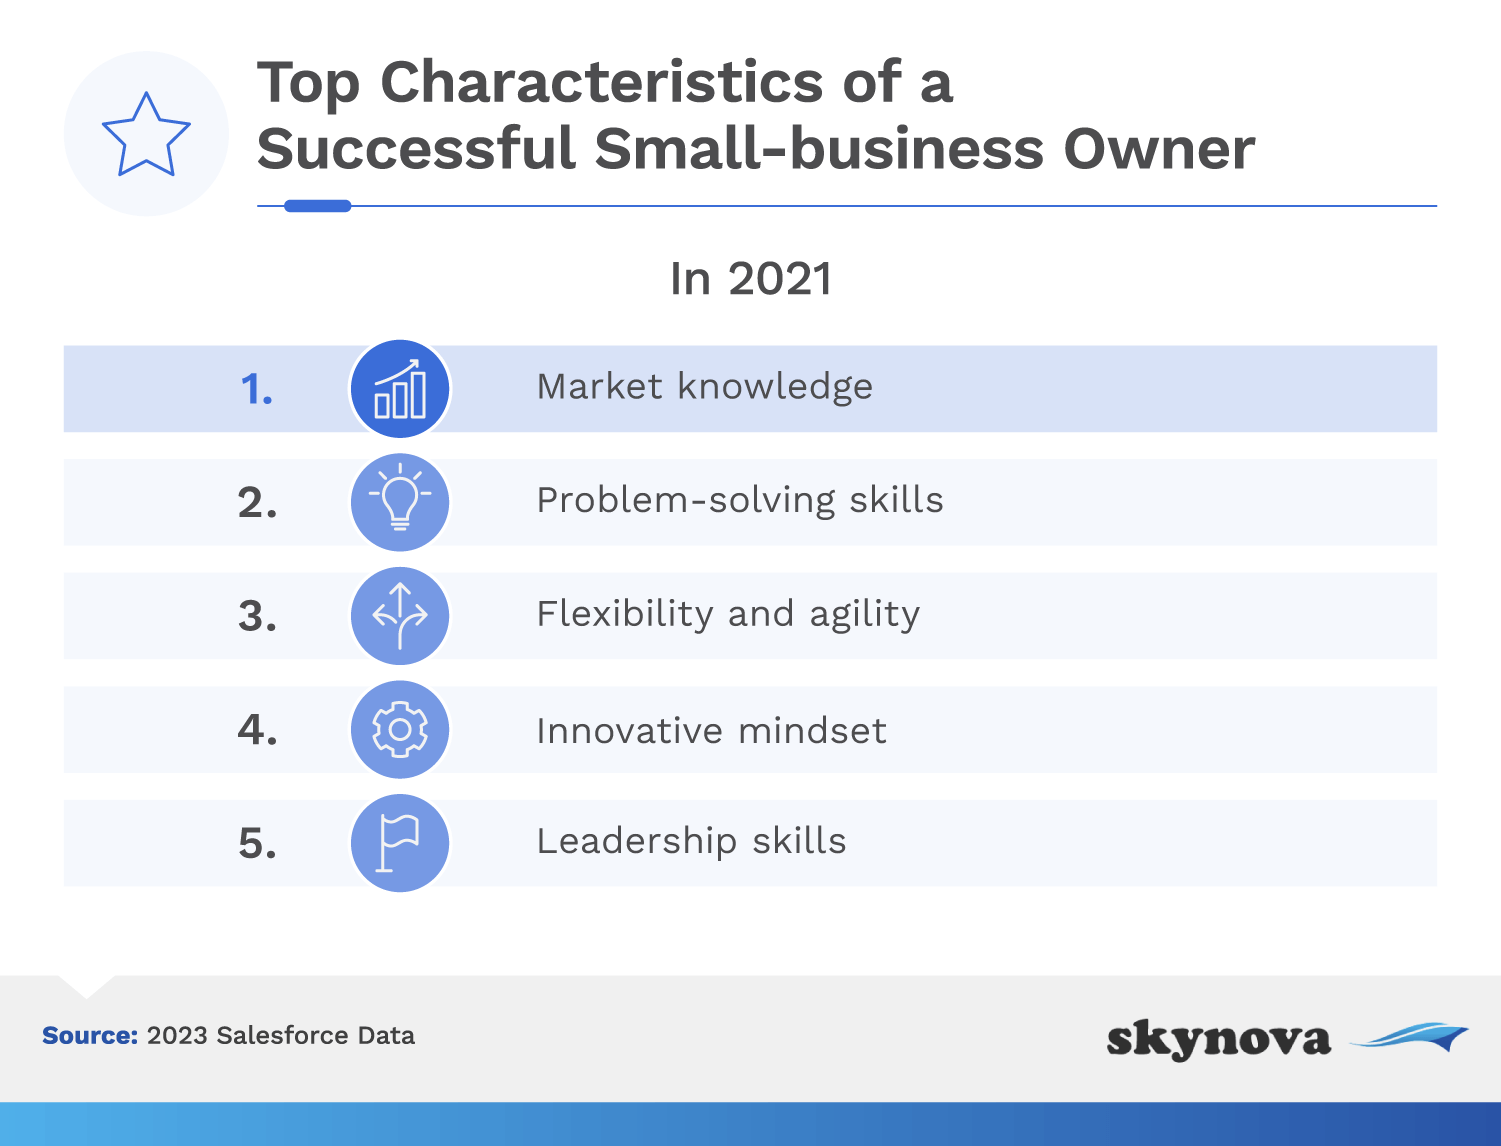 Survey: Top characteristics of successful small business owners